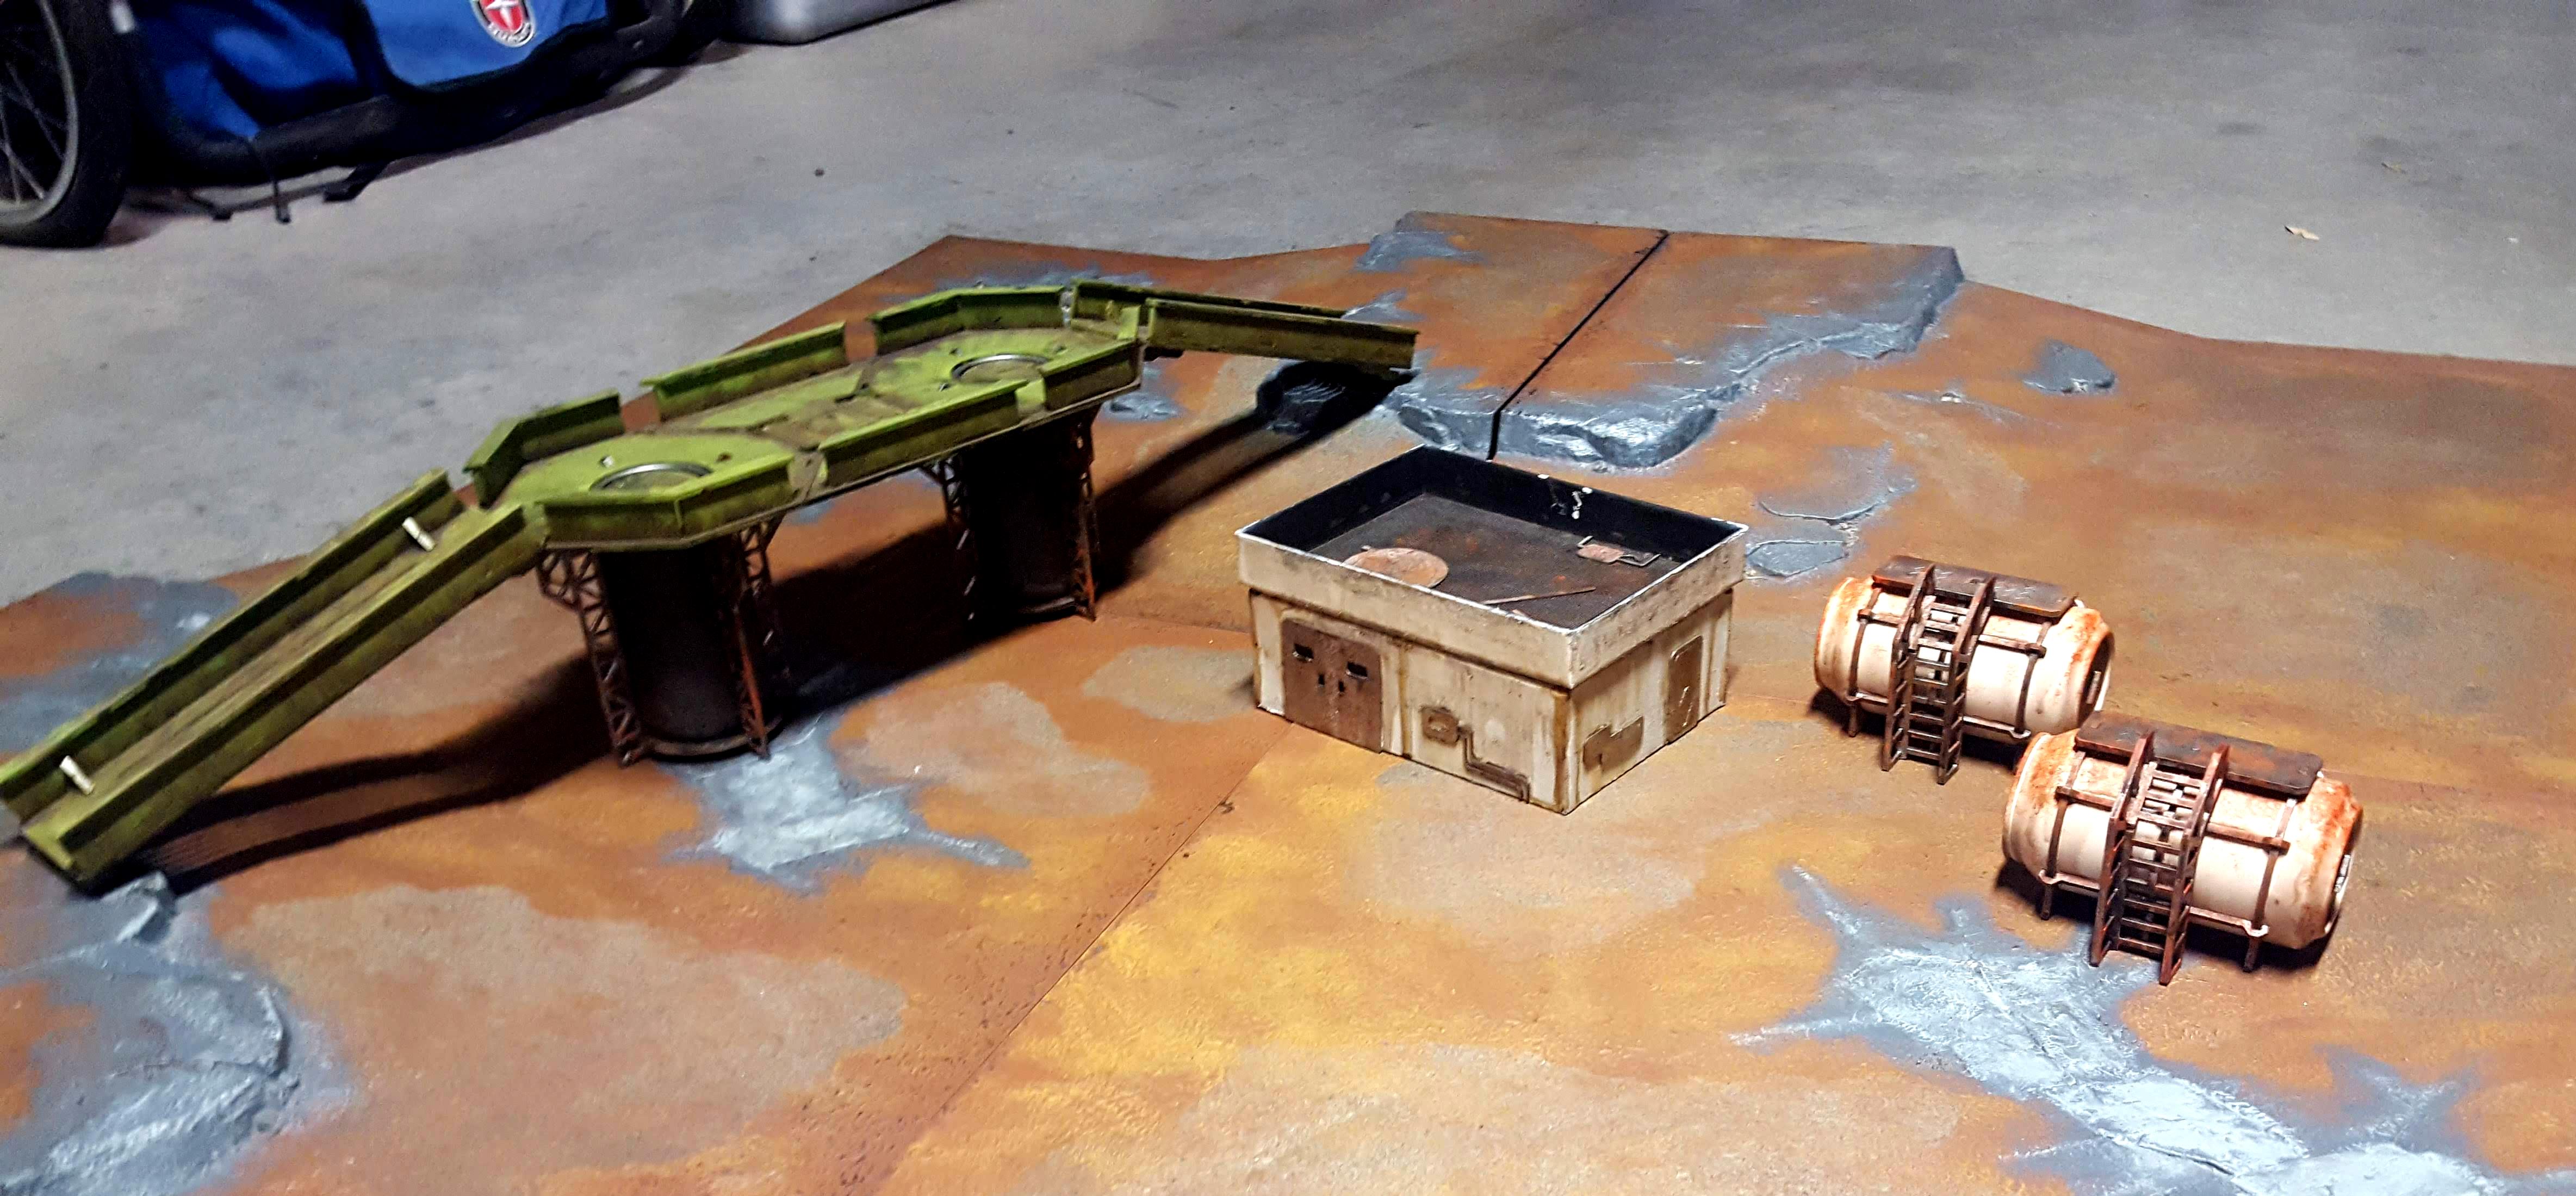 Promethium Forge MDF kits and a scratch-built building